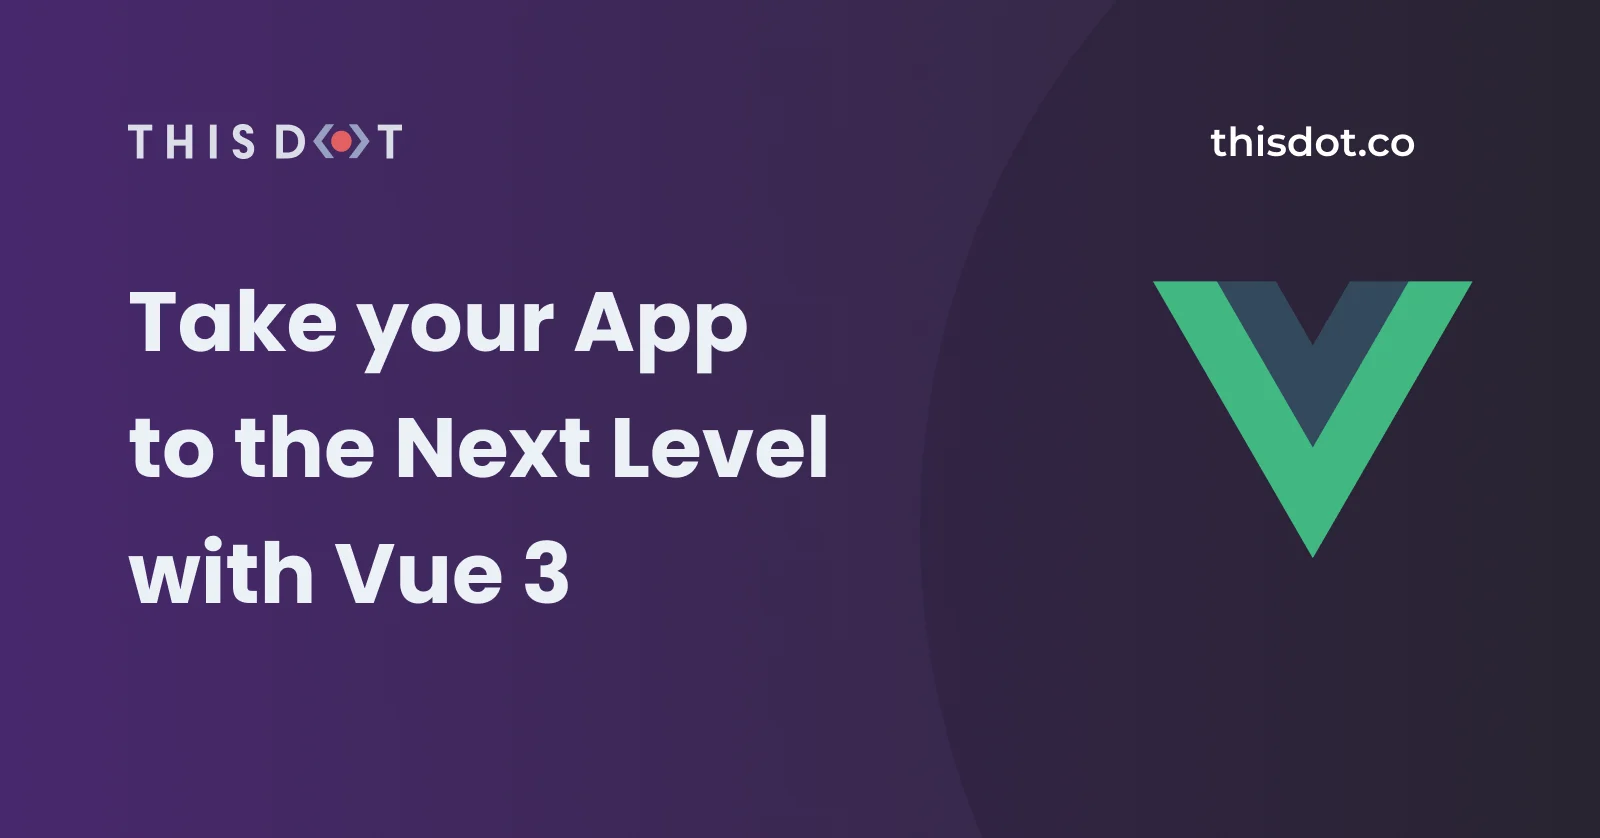 Take your App to the Next Level with Vue 3